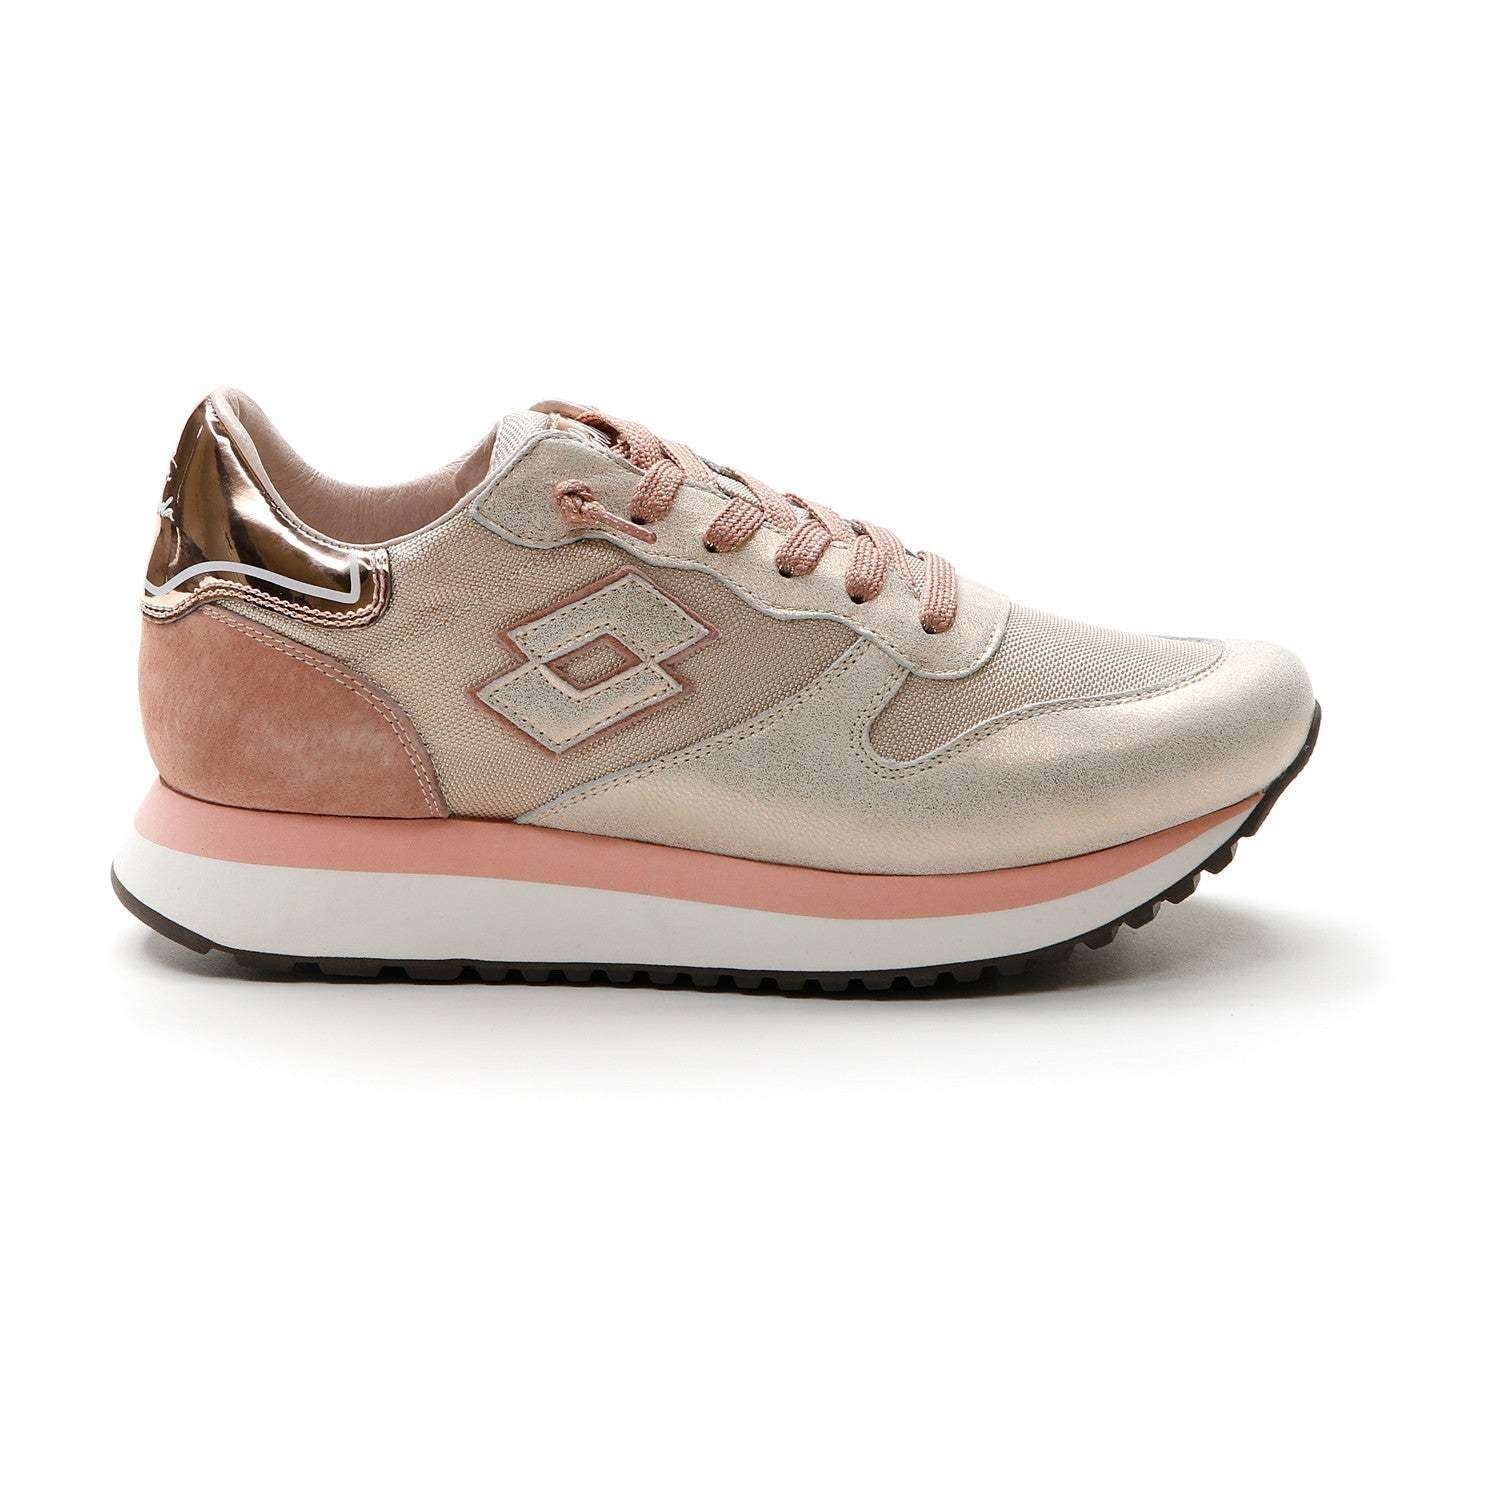 Lotto Donna Scarpe Sportive Wedge Metal W Sneakers Pink